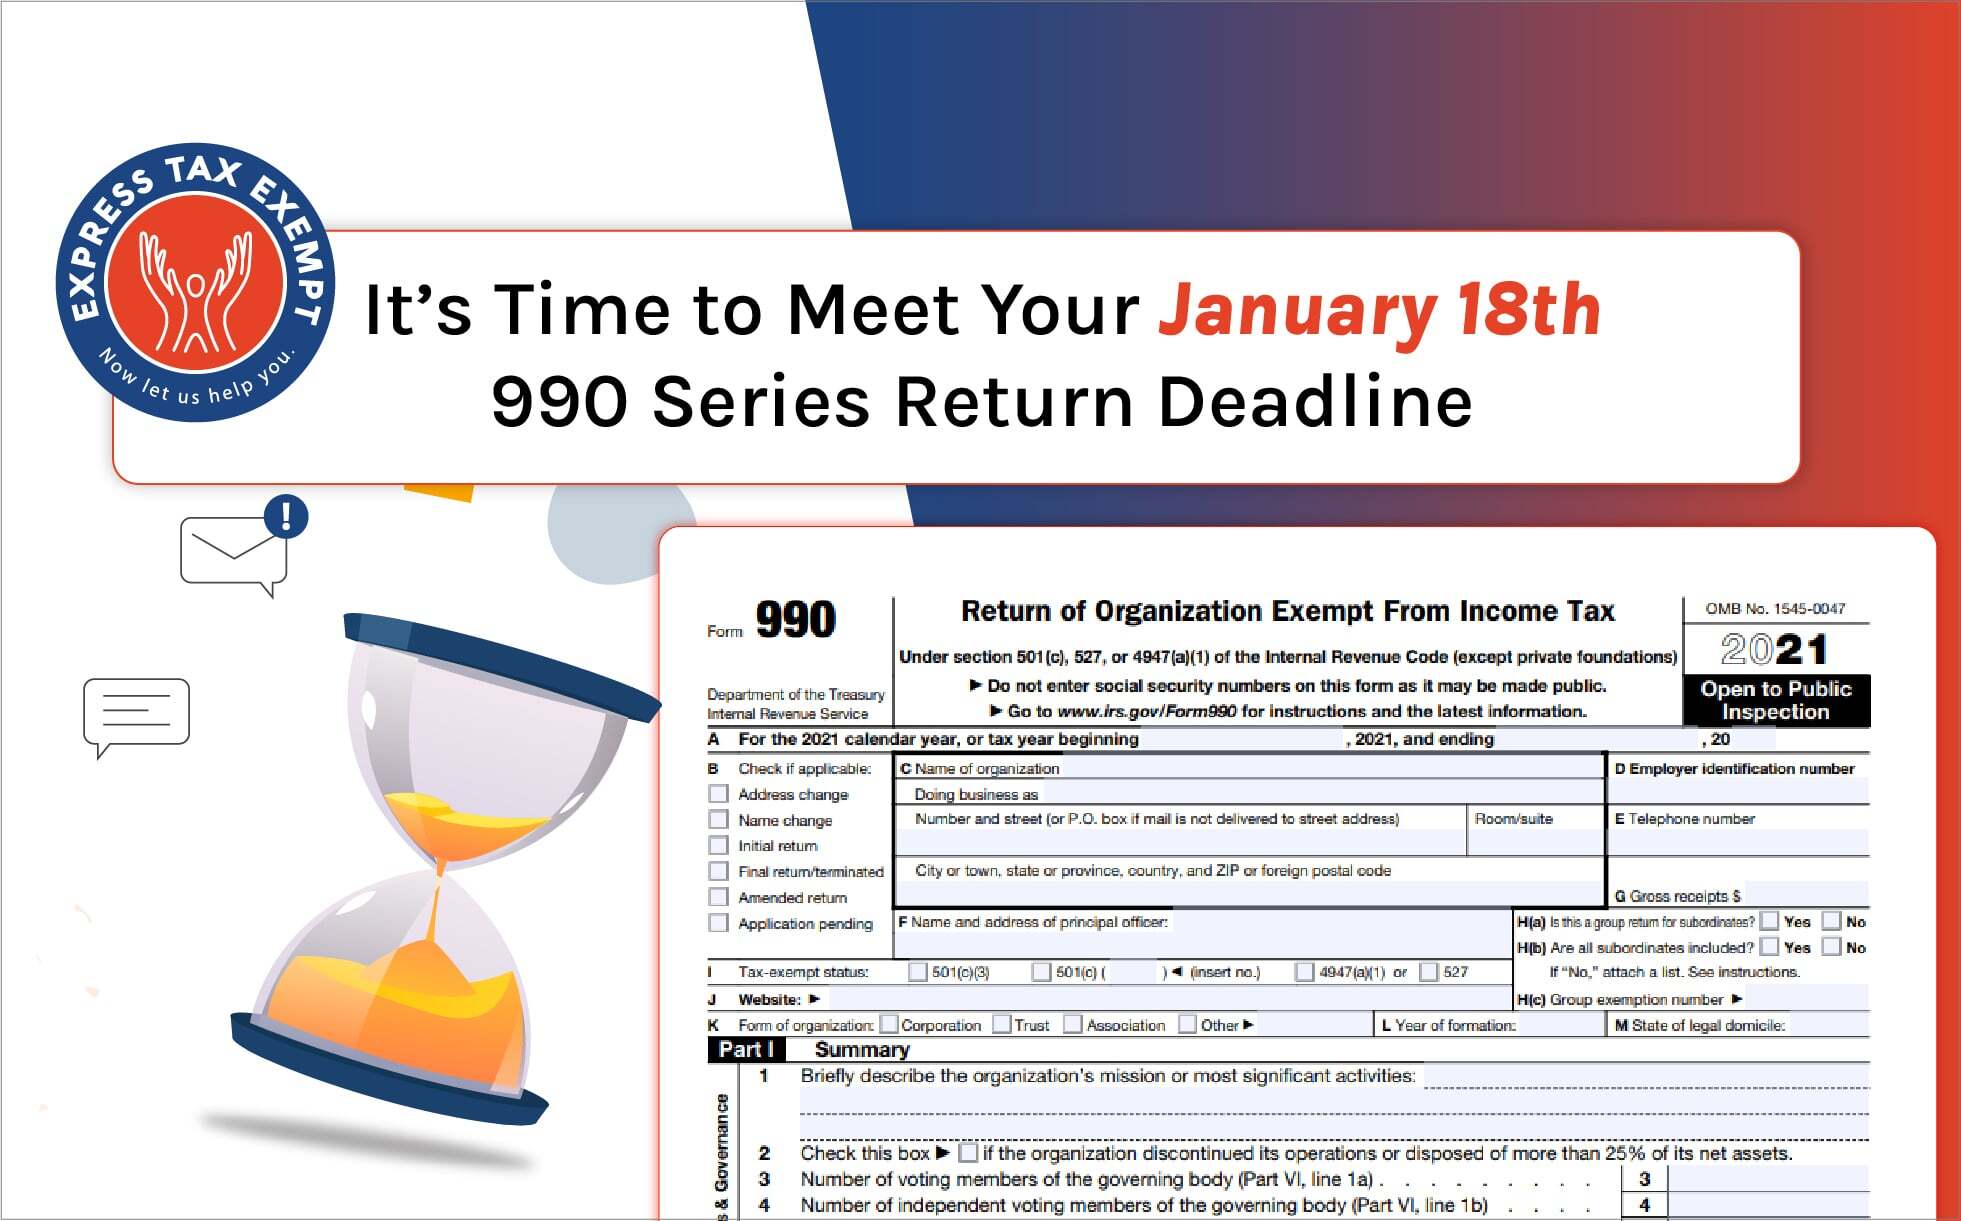 It’s Time to Meet Your January 18th 990 Series Return Deadline!